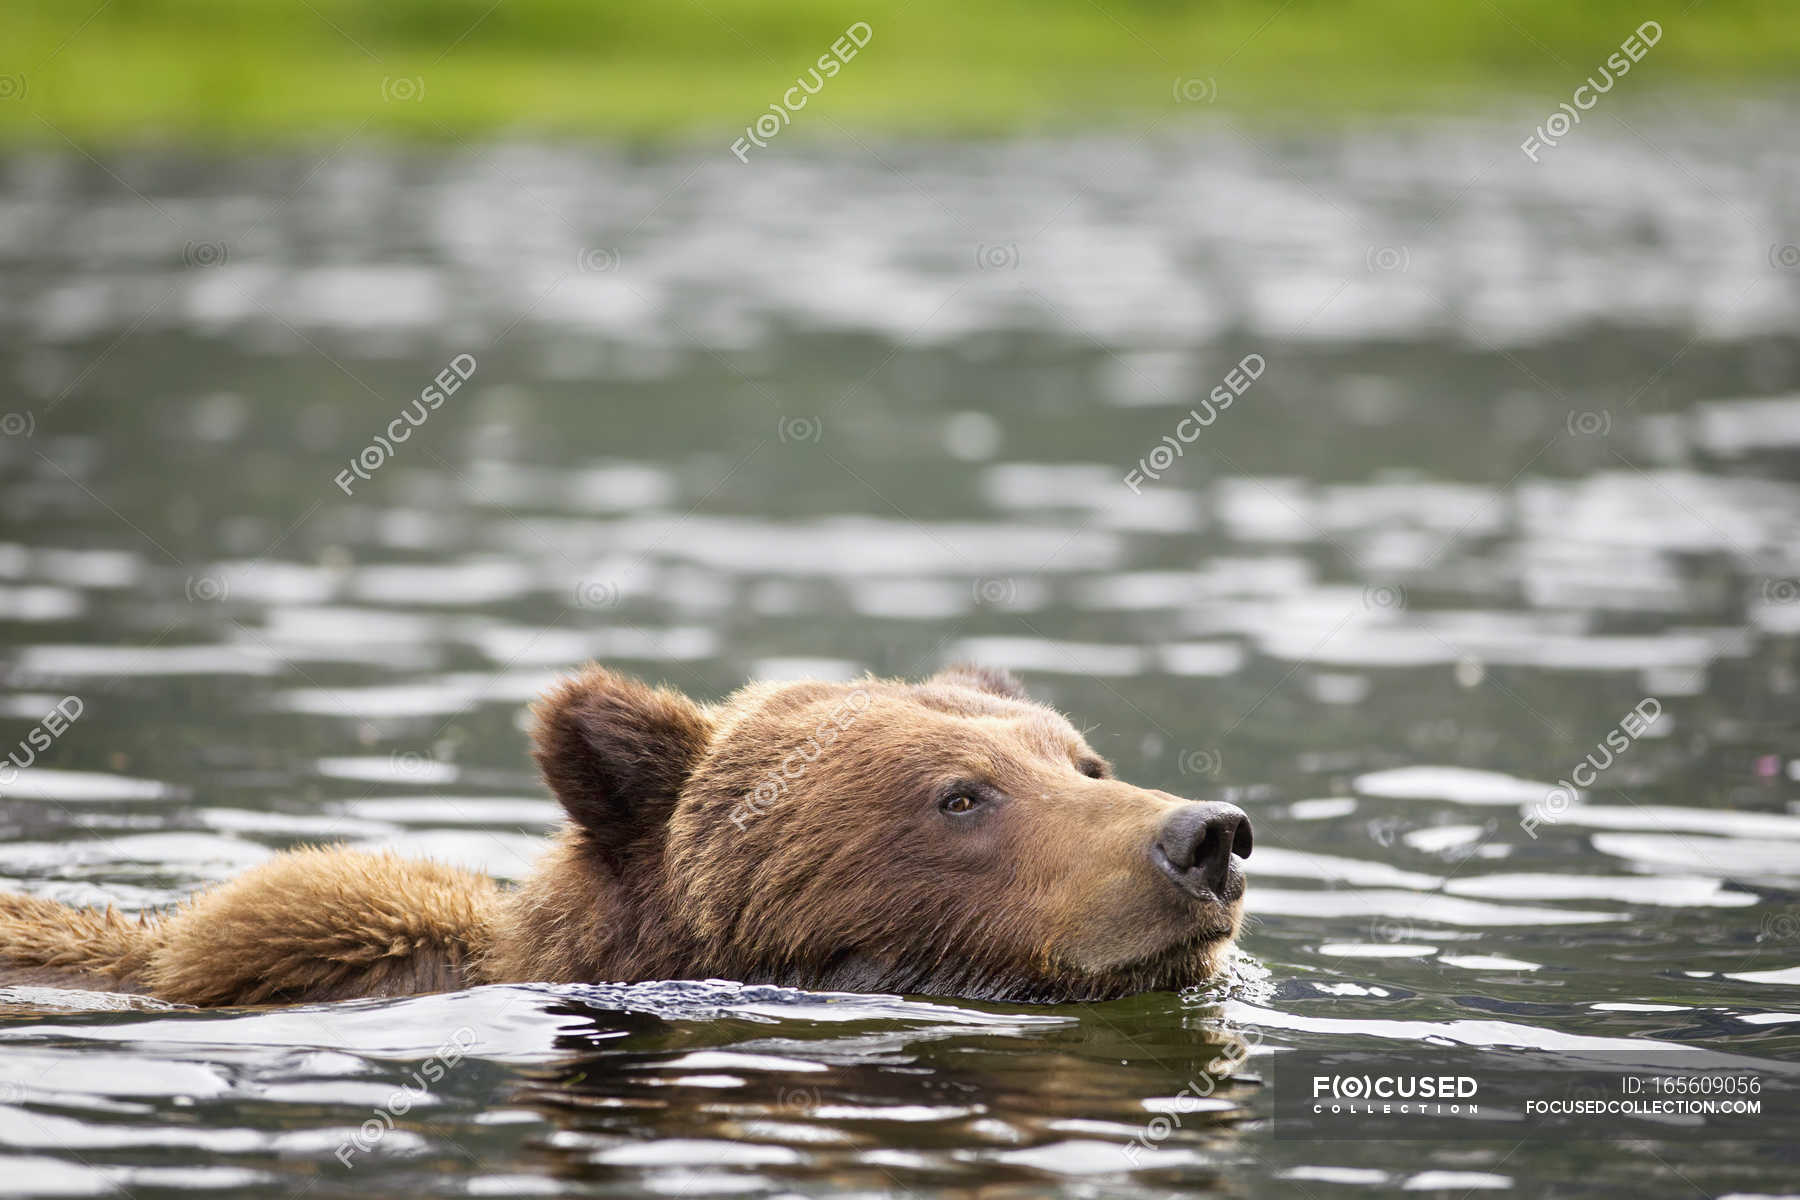 grizzly bears can swim